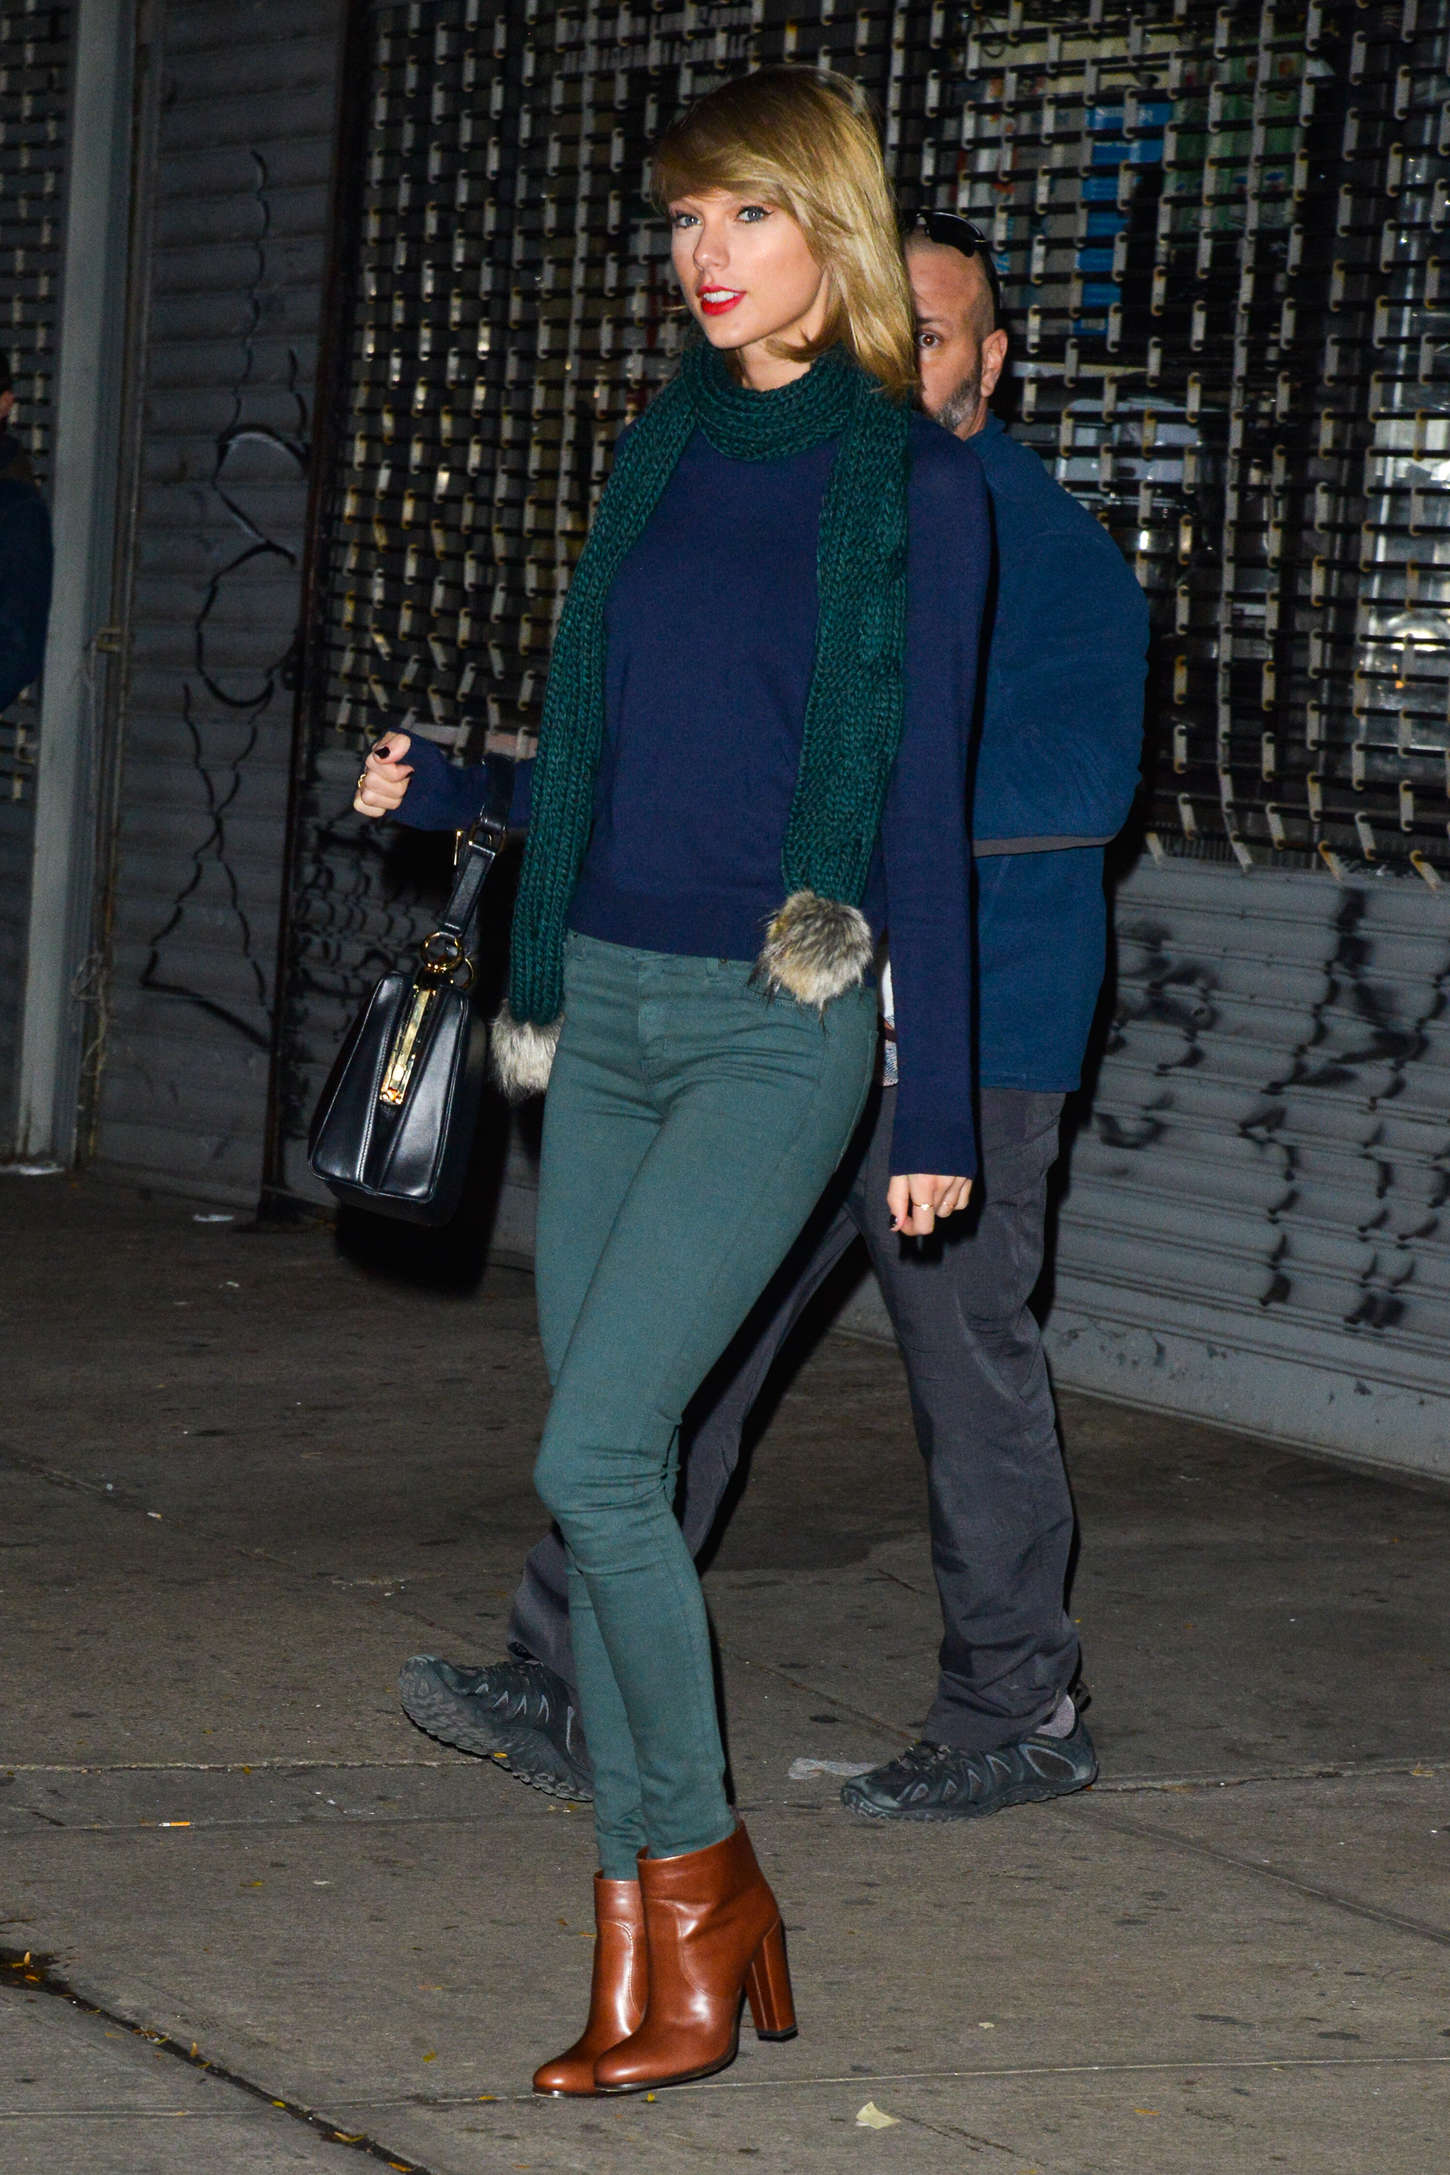 Taylor Swift in Green Tight Jeans -03 | GotCeleb